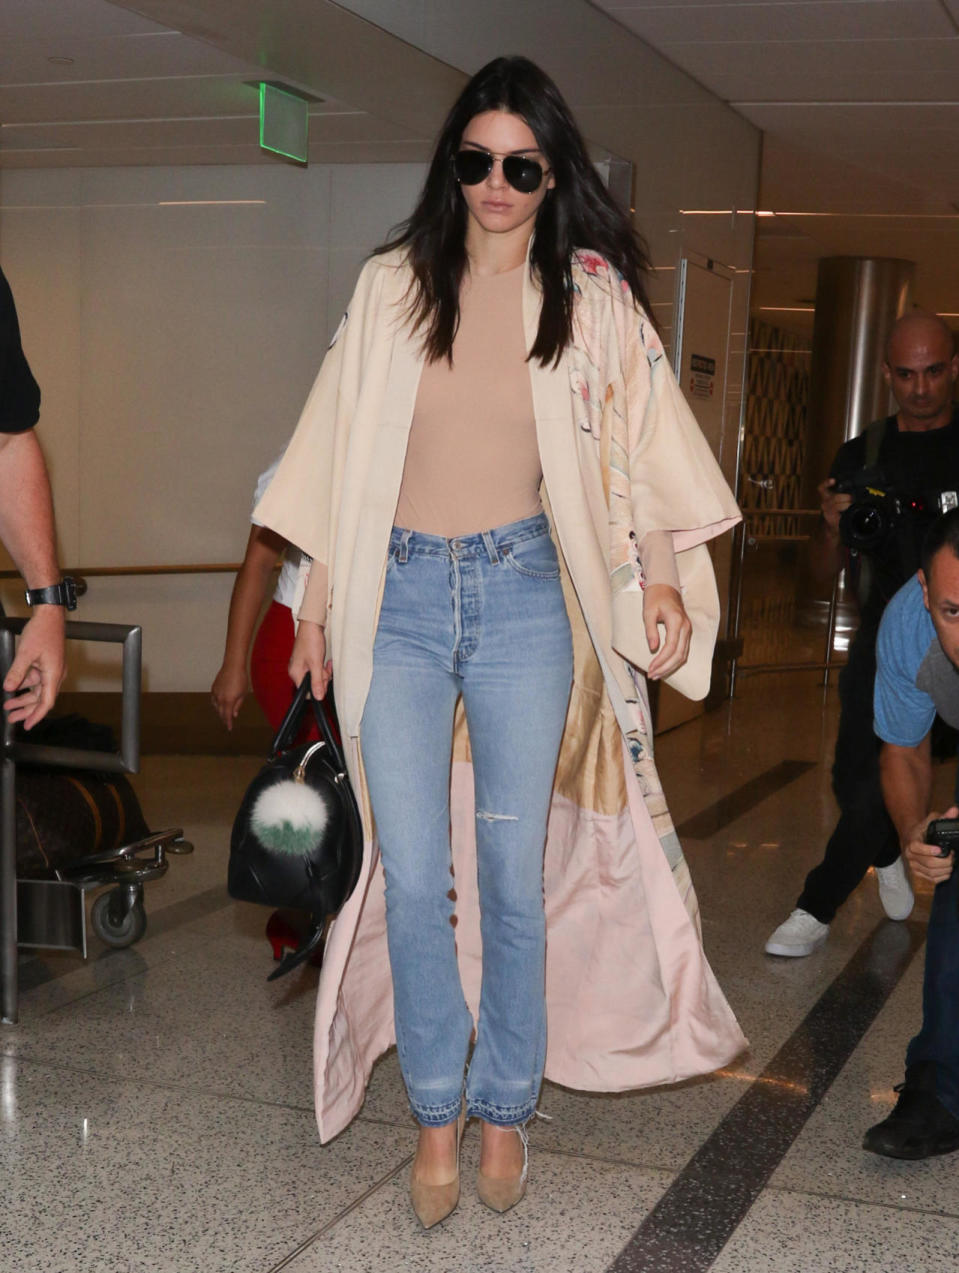 <p>Forget the naked dress—Kendall’s all about the naked top! On Saturday, the model strolled through the airport wearing a simple outfit of jeans and a beige bodysuit (which almost looks like it isn’t there), topped off with a long, silky robe. She completed the low-key look with suede pumps, aviators, and trendy fur charm clipped to her bag.</p>